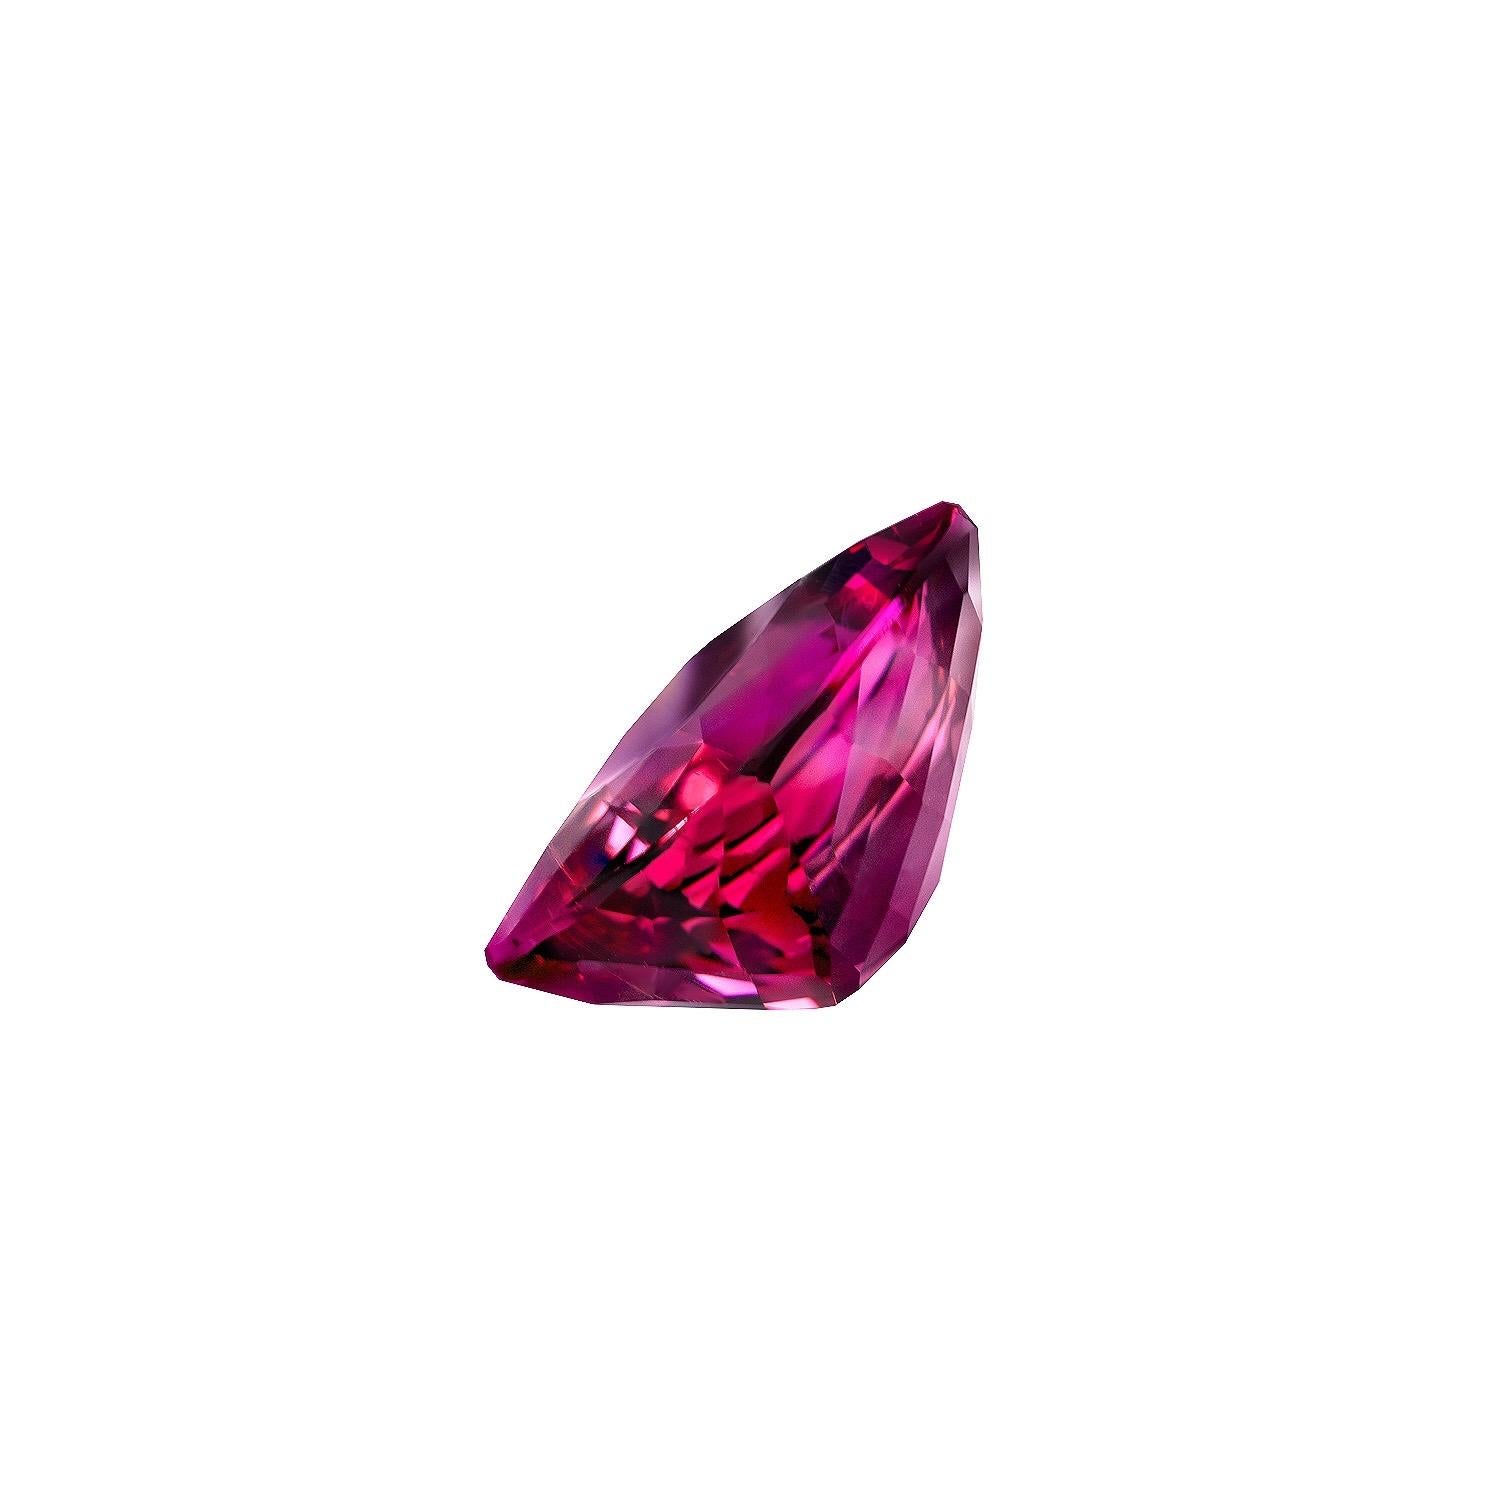 Superior 8.86 carat Rubelite Tourmaline cushion cut unmounted gemstone.
This collection quality gem is offered loose to a very special lady or gentleman. 
Returns are accepted and paid by us within 7 days of delivery.
All images are magnified to